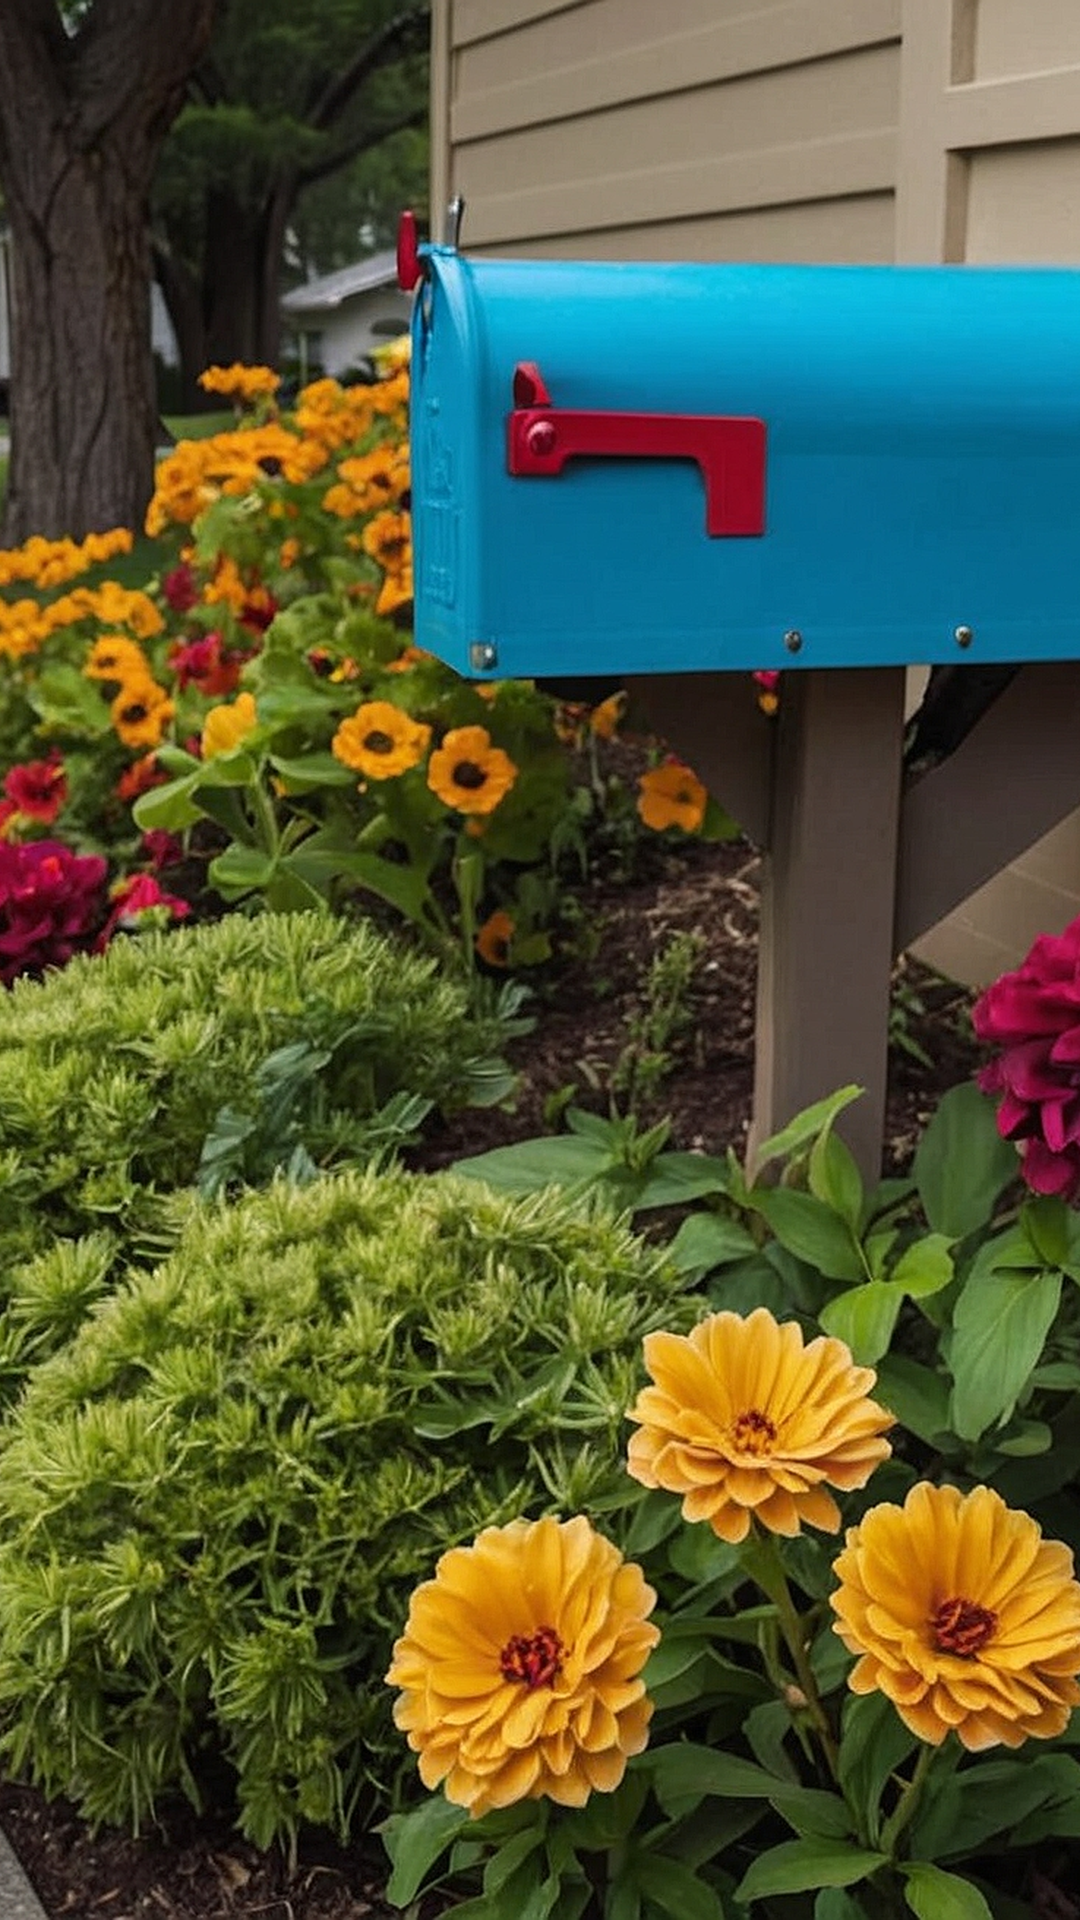 Blossoming By the Mailbox: Inspiring Floral Displays